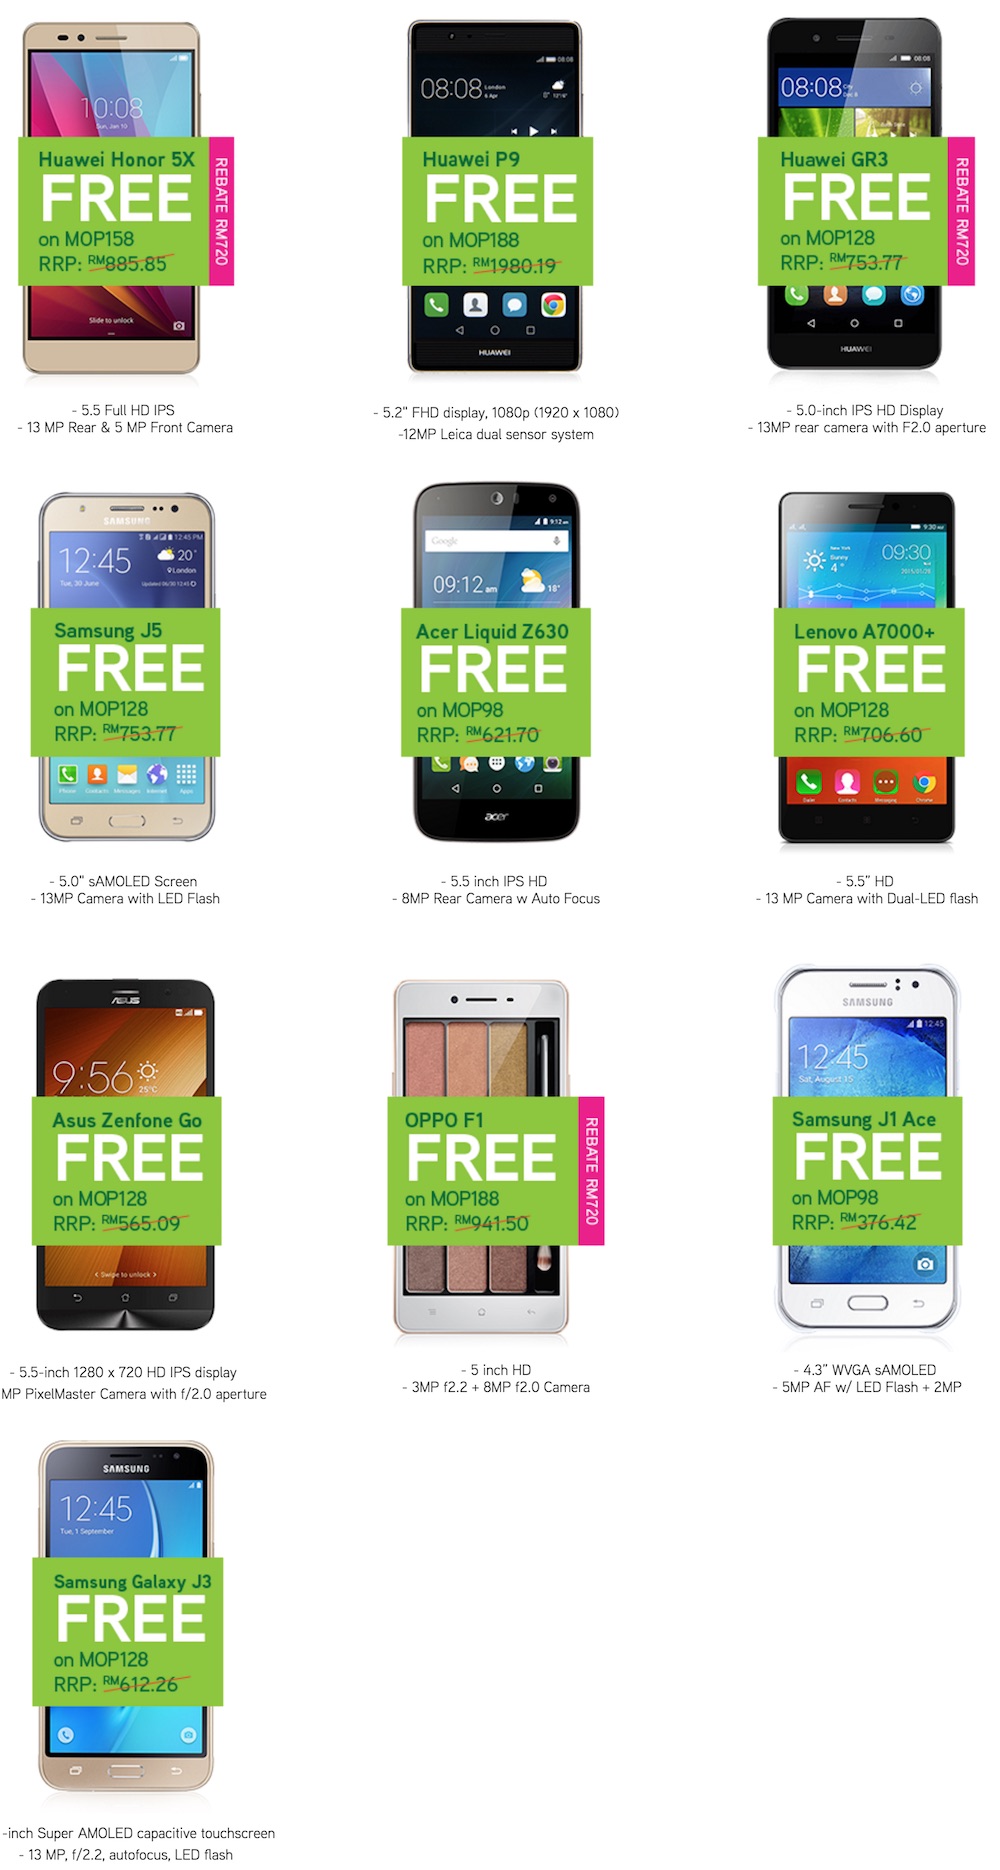 maxis business plan free phone